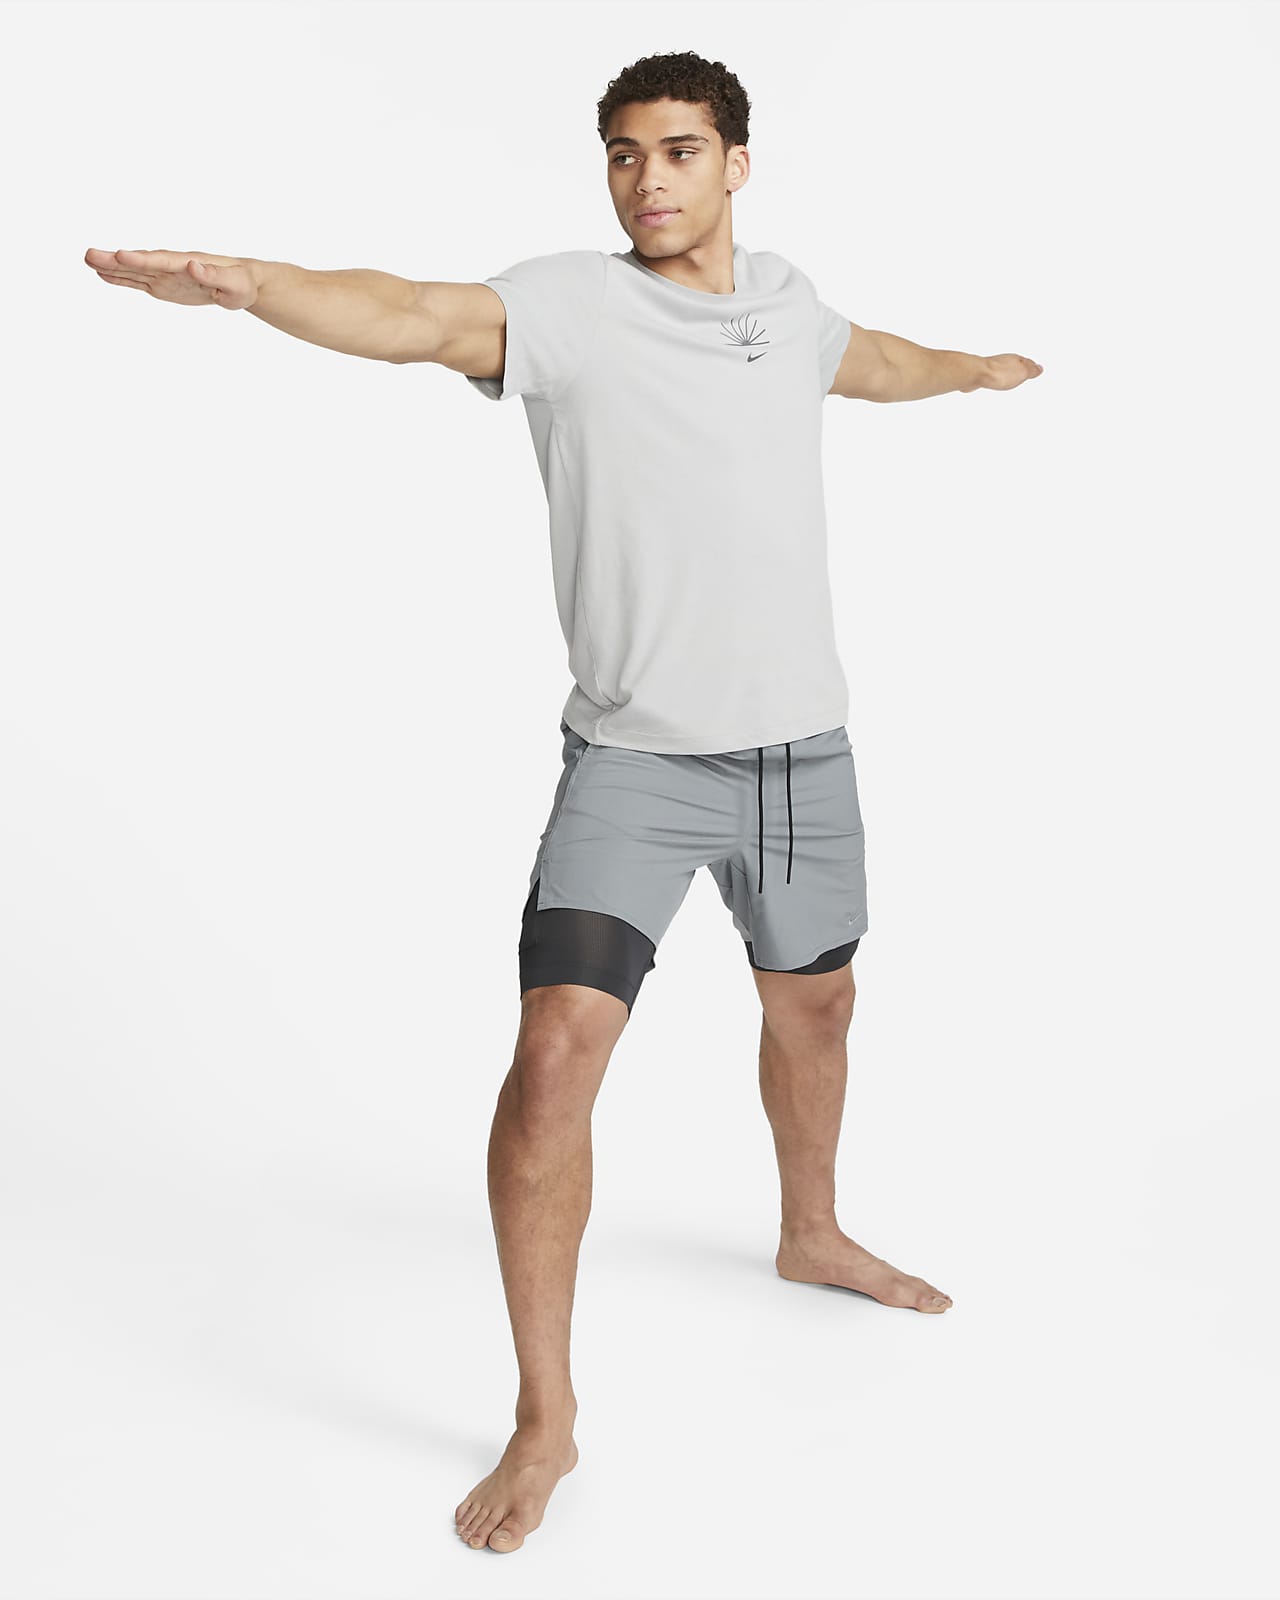 Under Armour's Bestselling Athletic Shorts Are Now Under $15 - Men's Journal